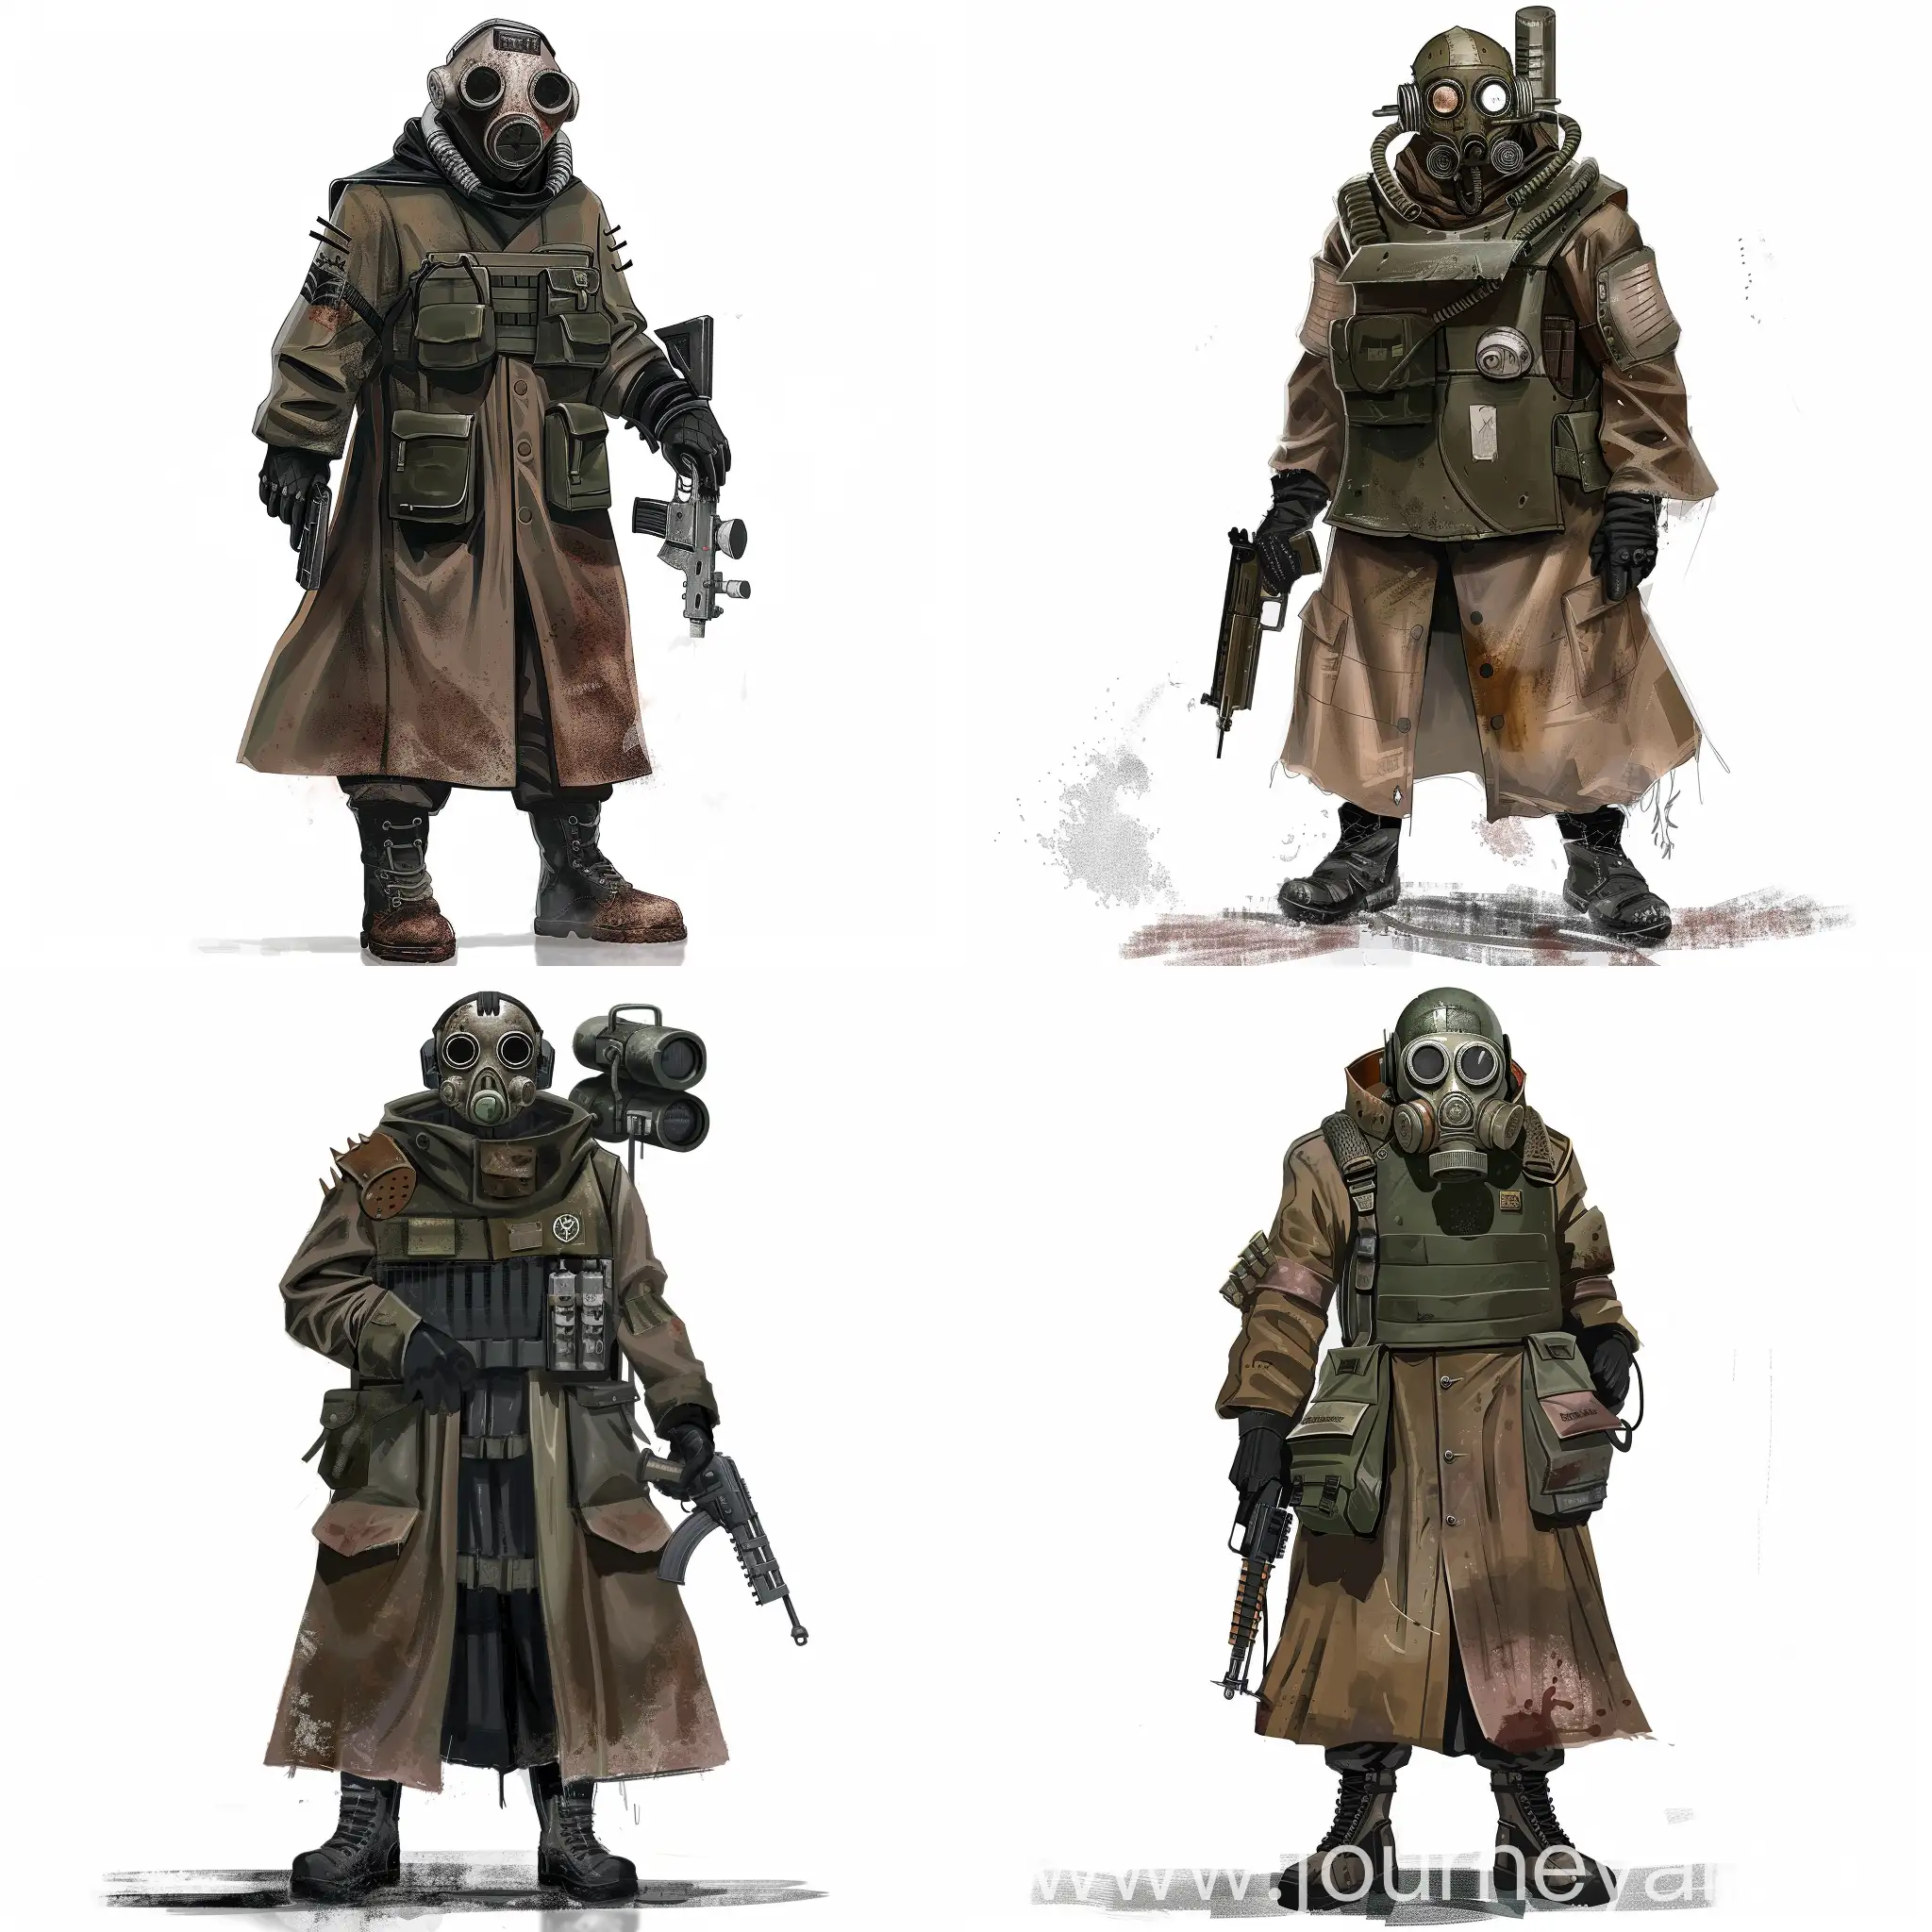 PostApocalyptic-Hansa-Soldier-in-Gas-Mask-with-Pistol-and-Floodlight